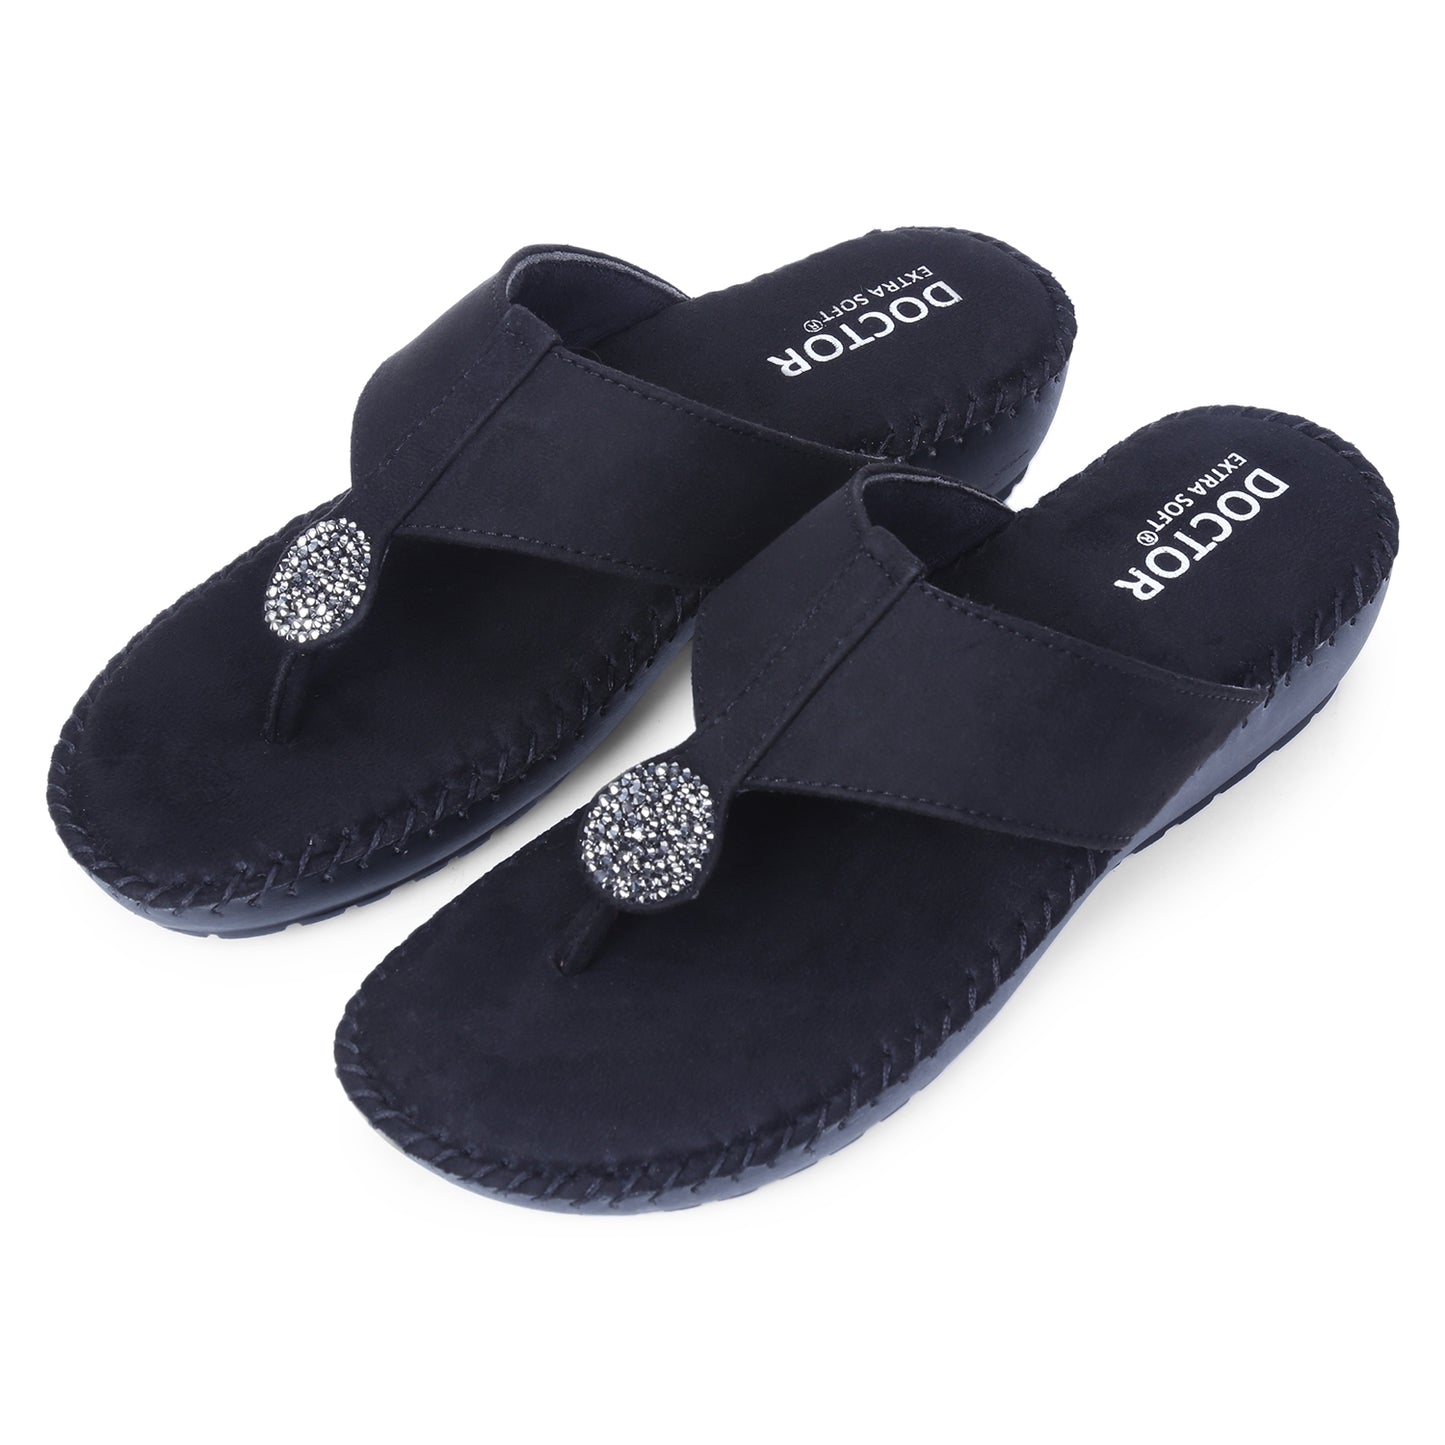 DOCTOR EXTRA SOFT D-612 Women's Flat Memory Foam Slippers/Flip-Flops Fancy Fashion Stylish Jewels Casual Comfortable Diabetic Orthopedic Orthocare Lightweight Synthetic Slipon Chappal for Girls/Ladies